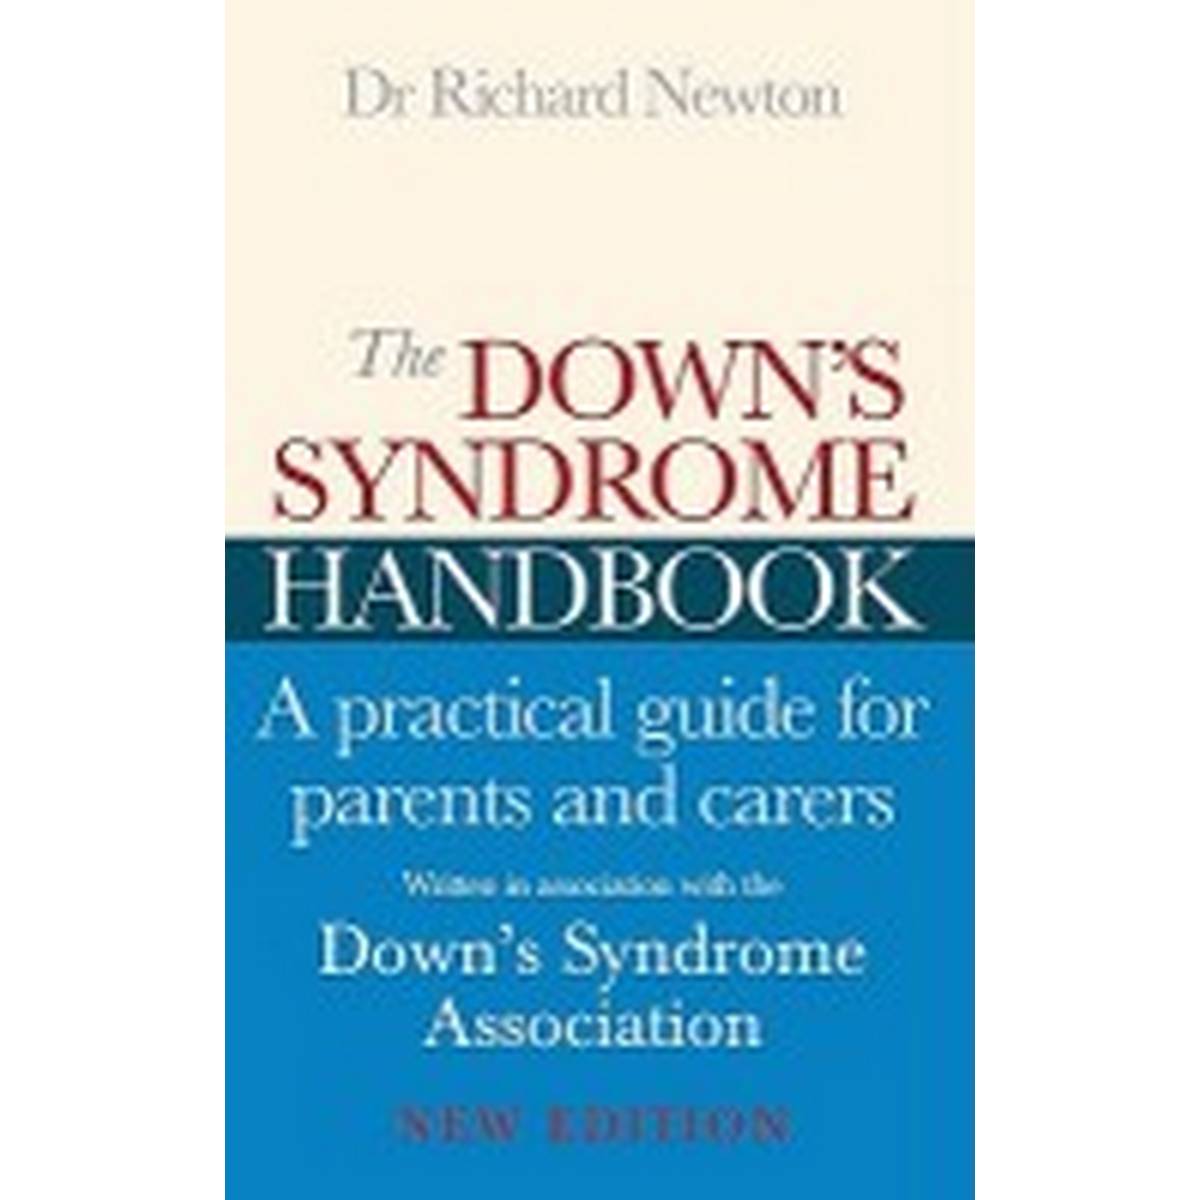 The Downs Syndrome Handbook: The Practical Handbook for Parents